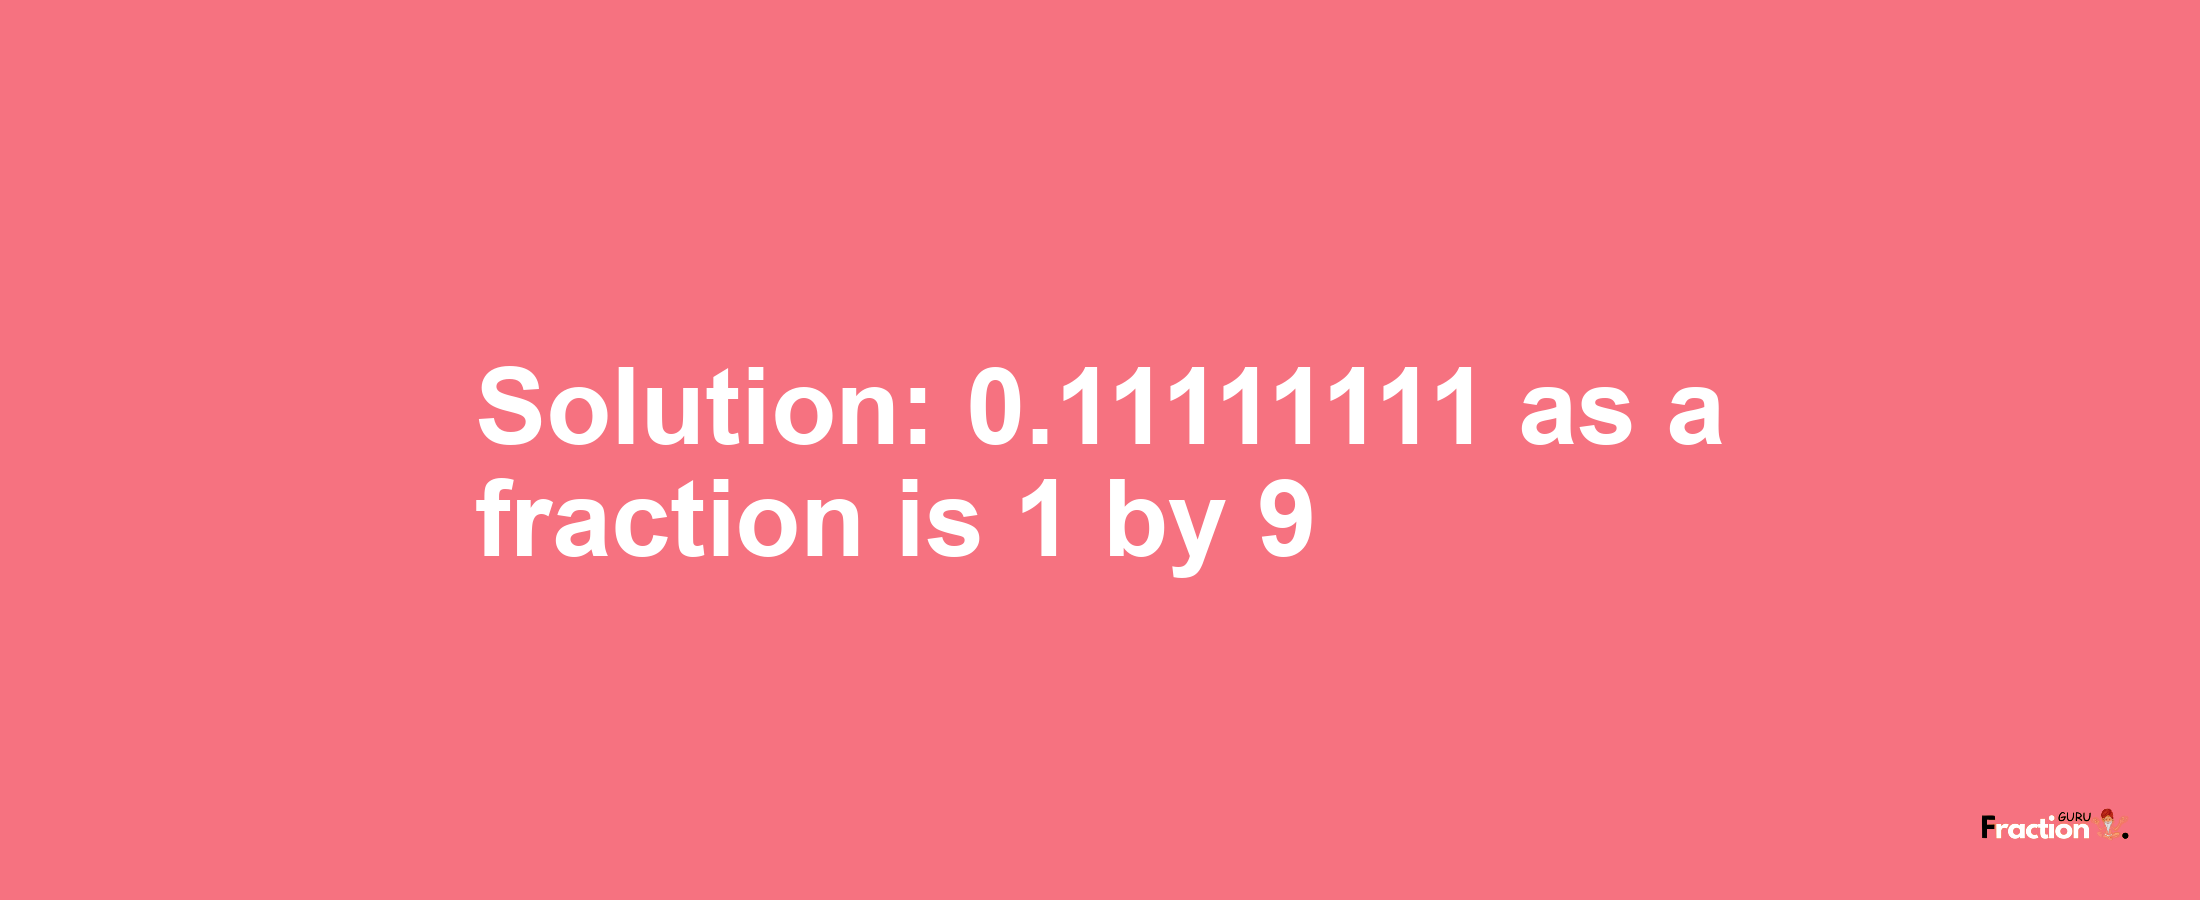 Solution:0.11111111 as a fraction is 1/9